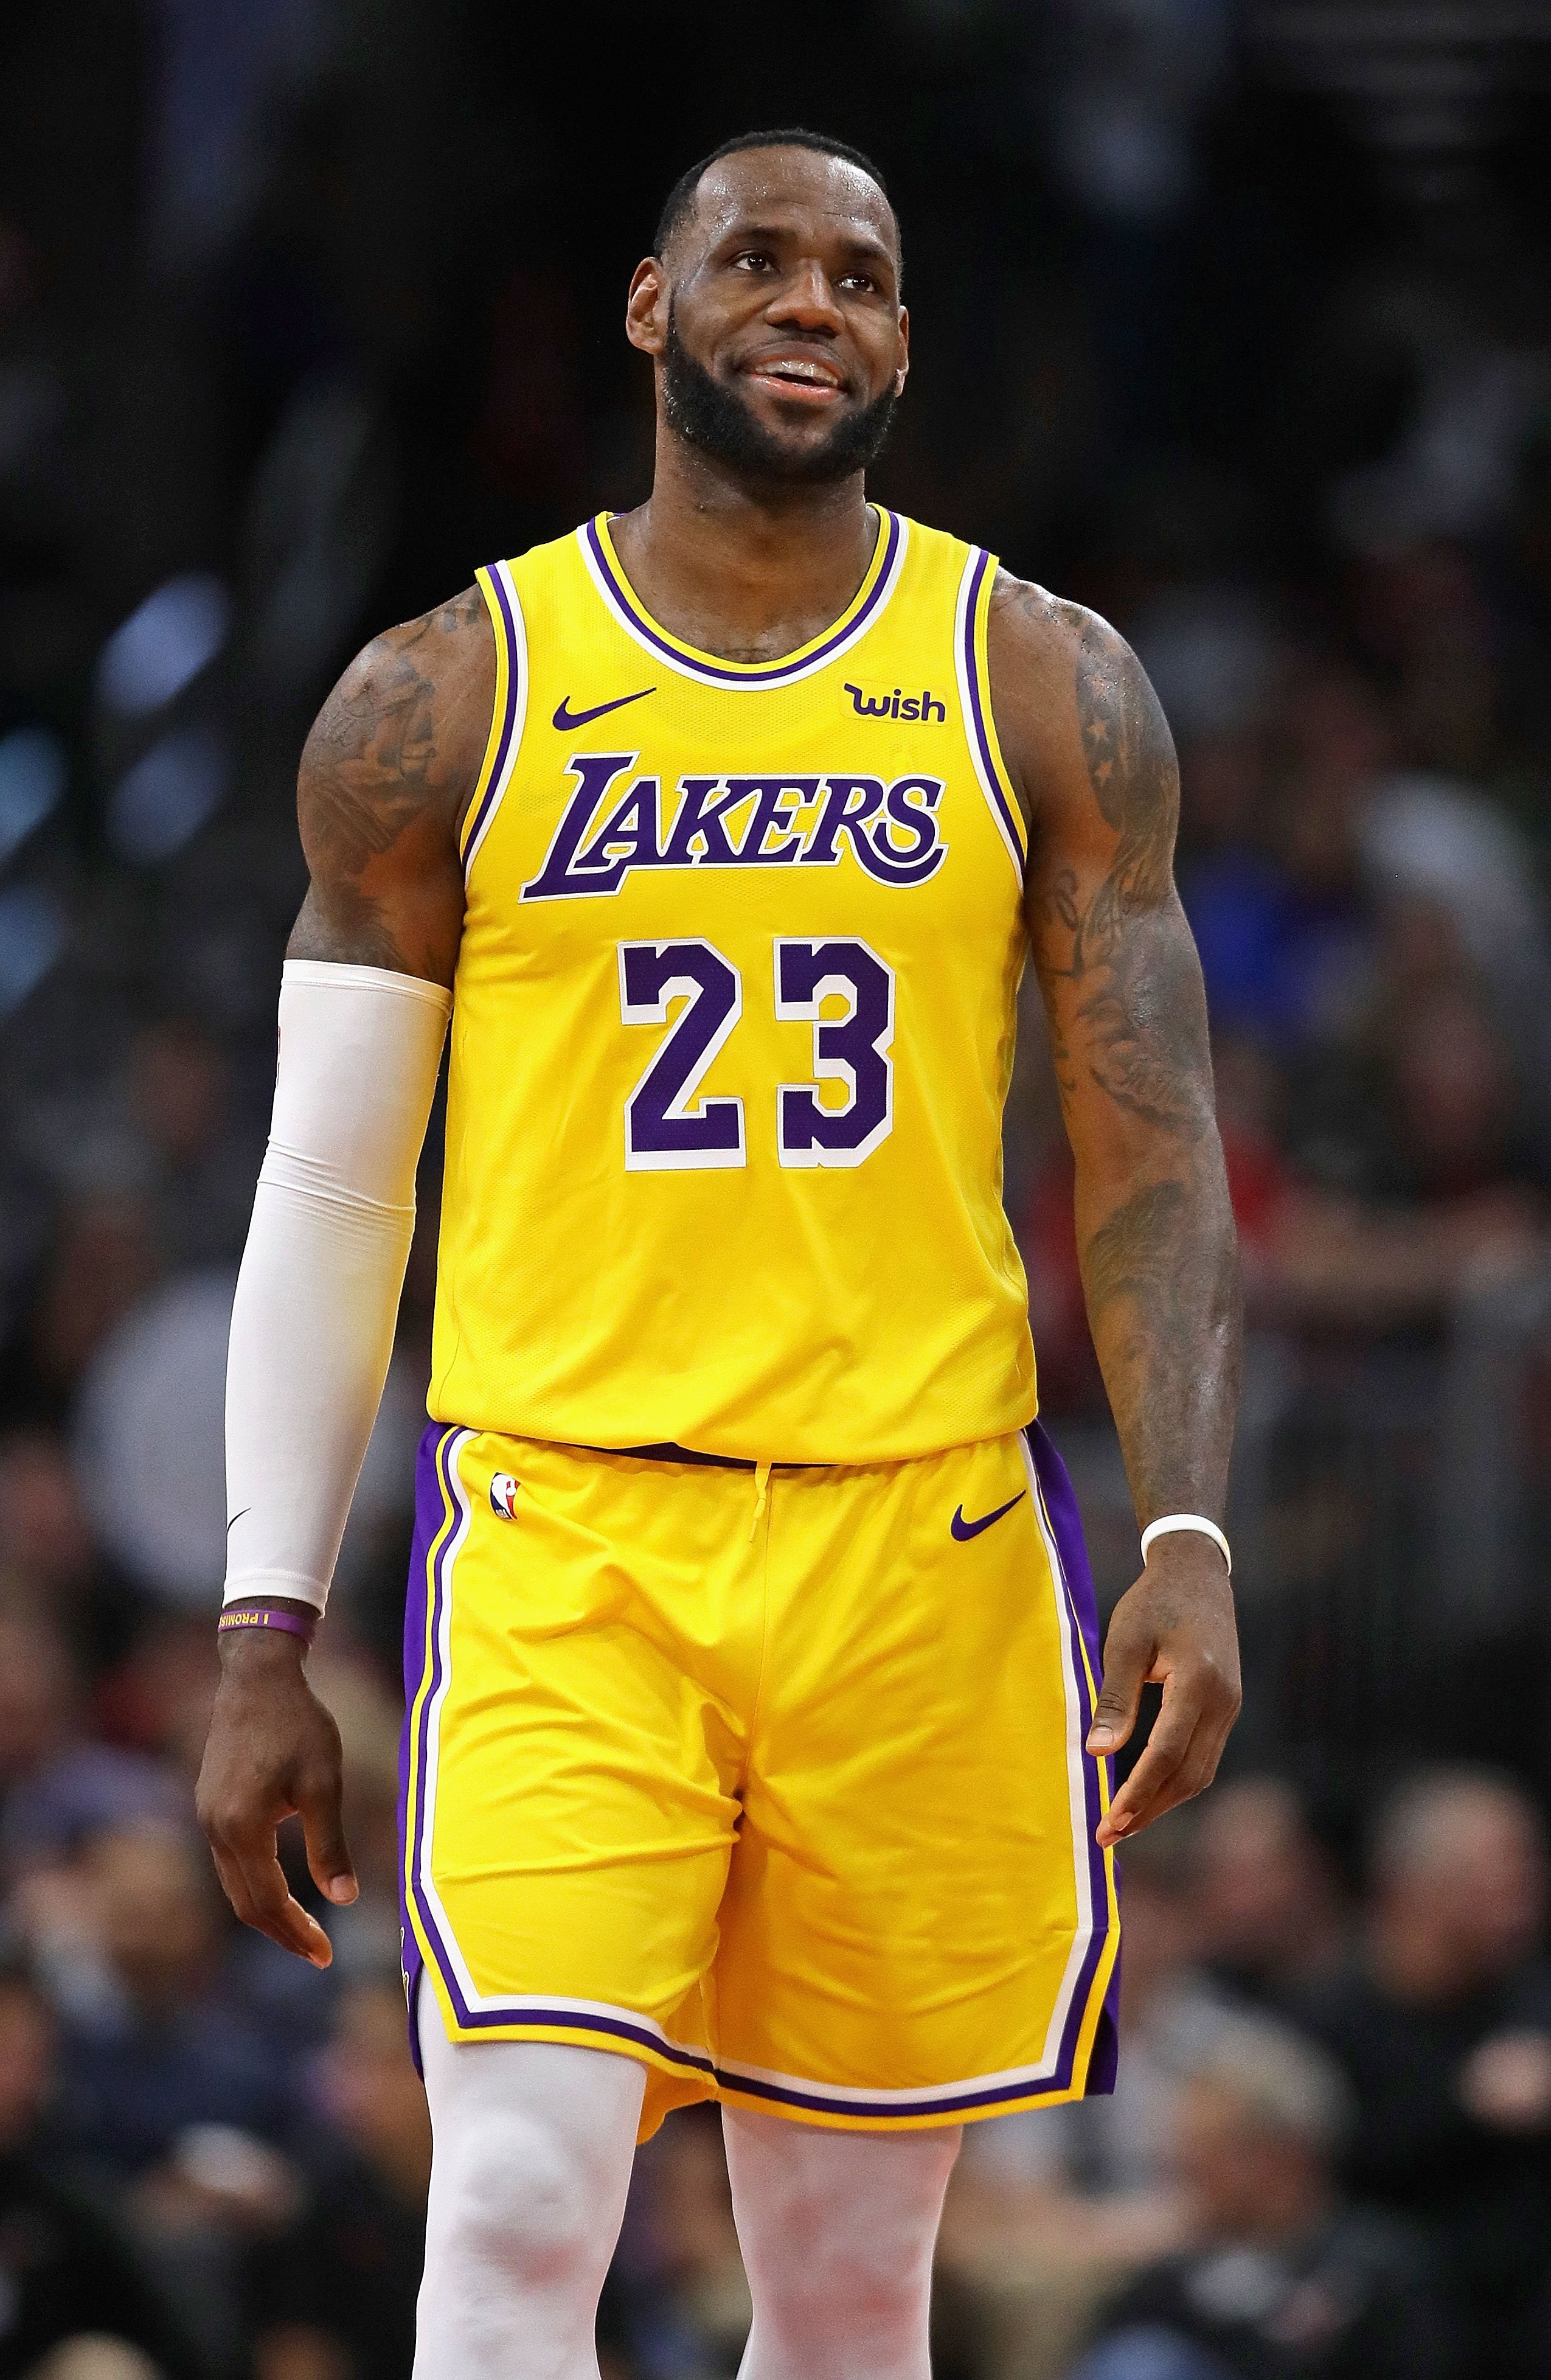 LeBron James #23 of the Los Angeles Lakers smiles after a play against the Chicago Bulls on March 12, 2019, in Chicago, Illinois. | Source: Getty Images.